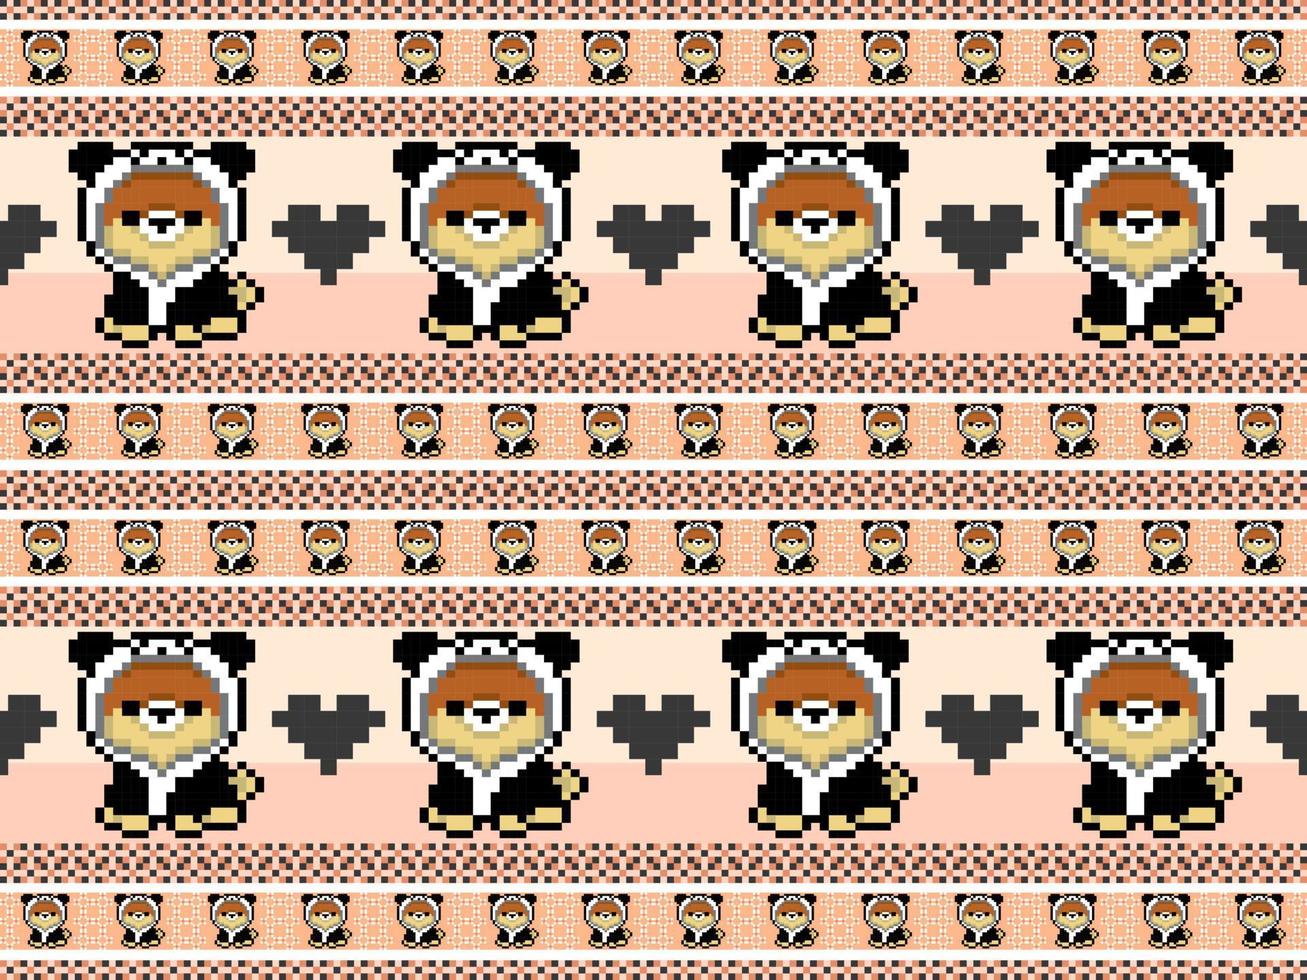 Dog cartoon character seamless pattern on orange background.Pixel style vector